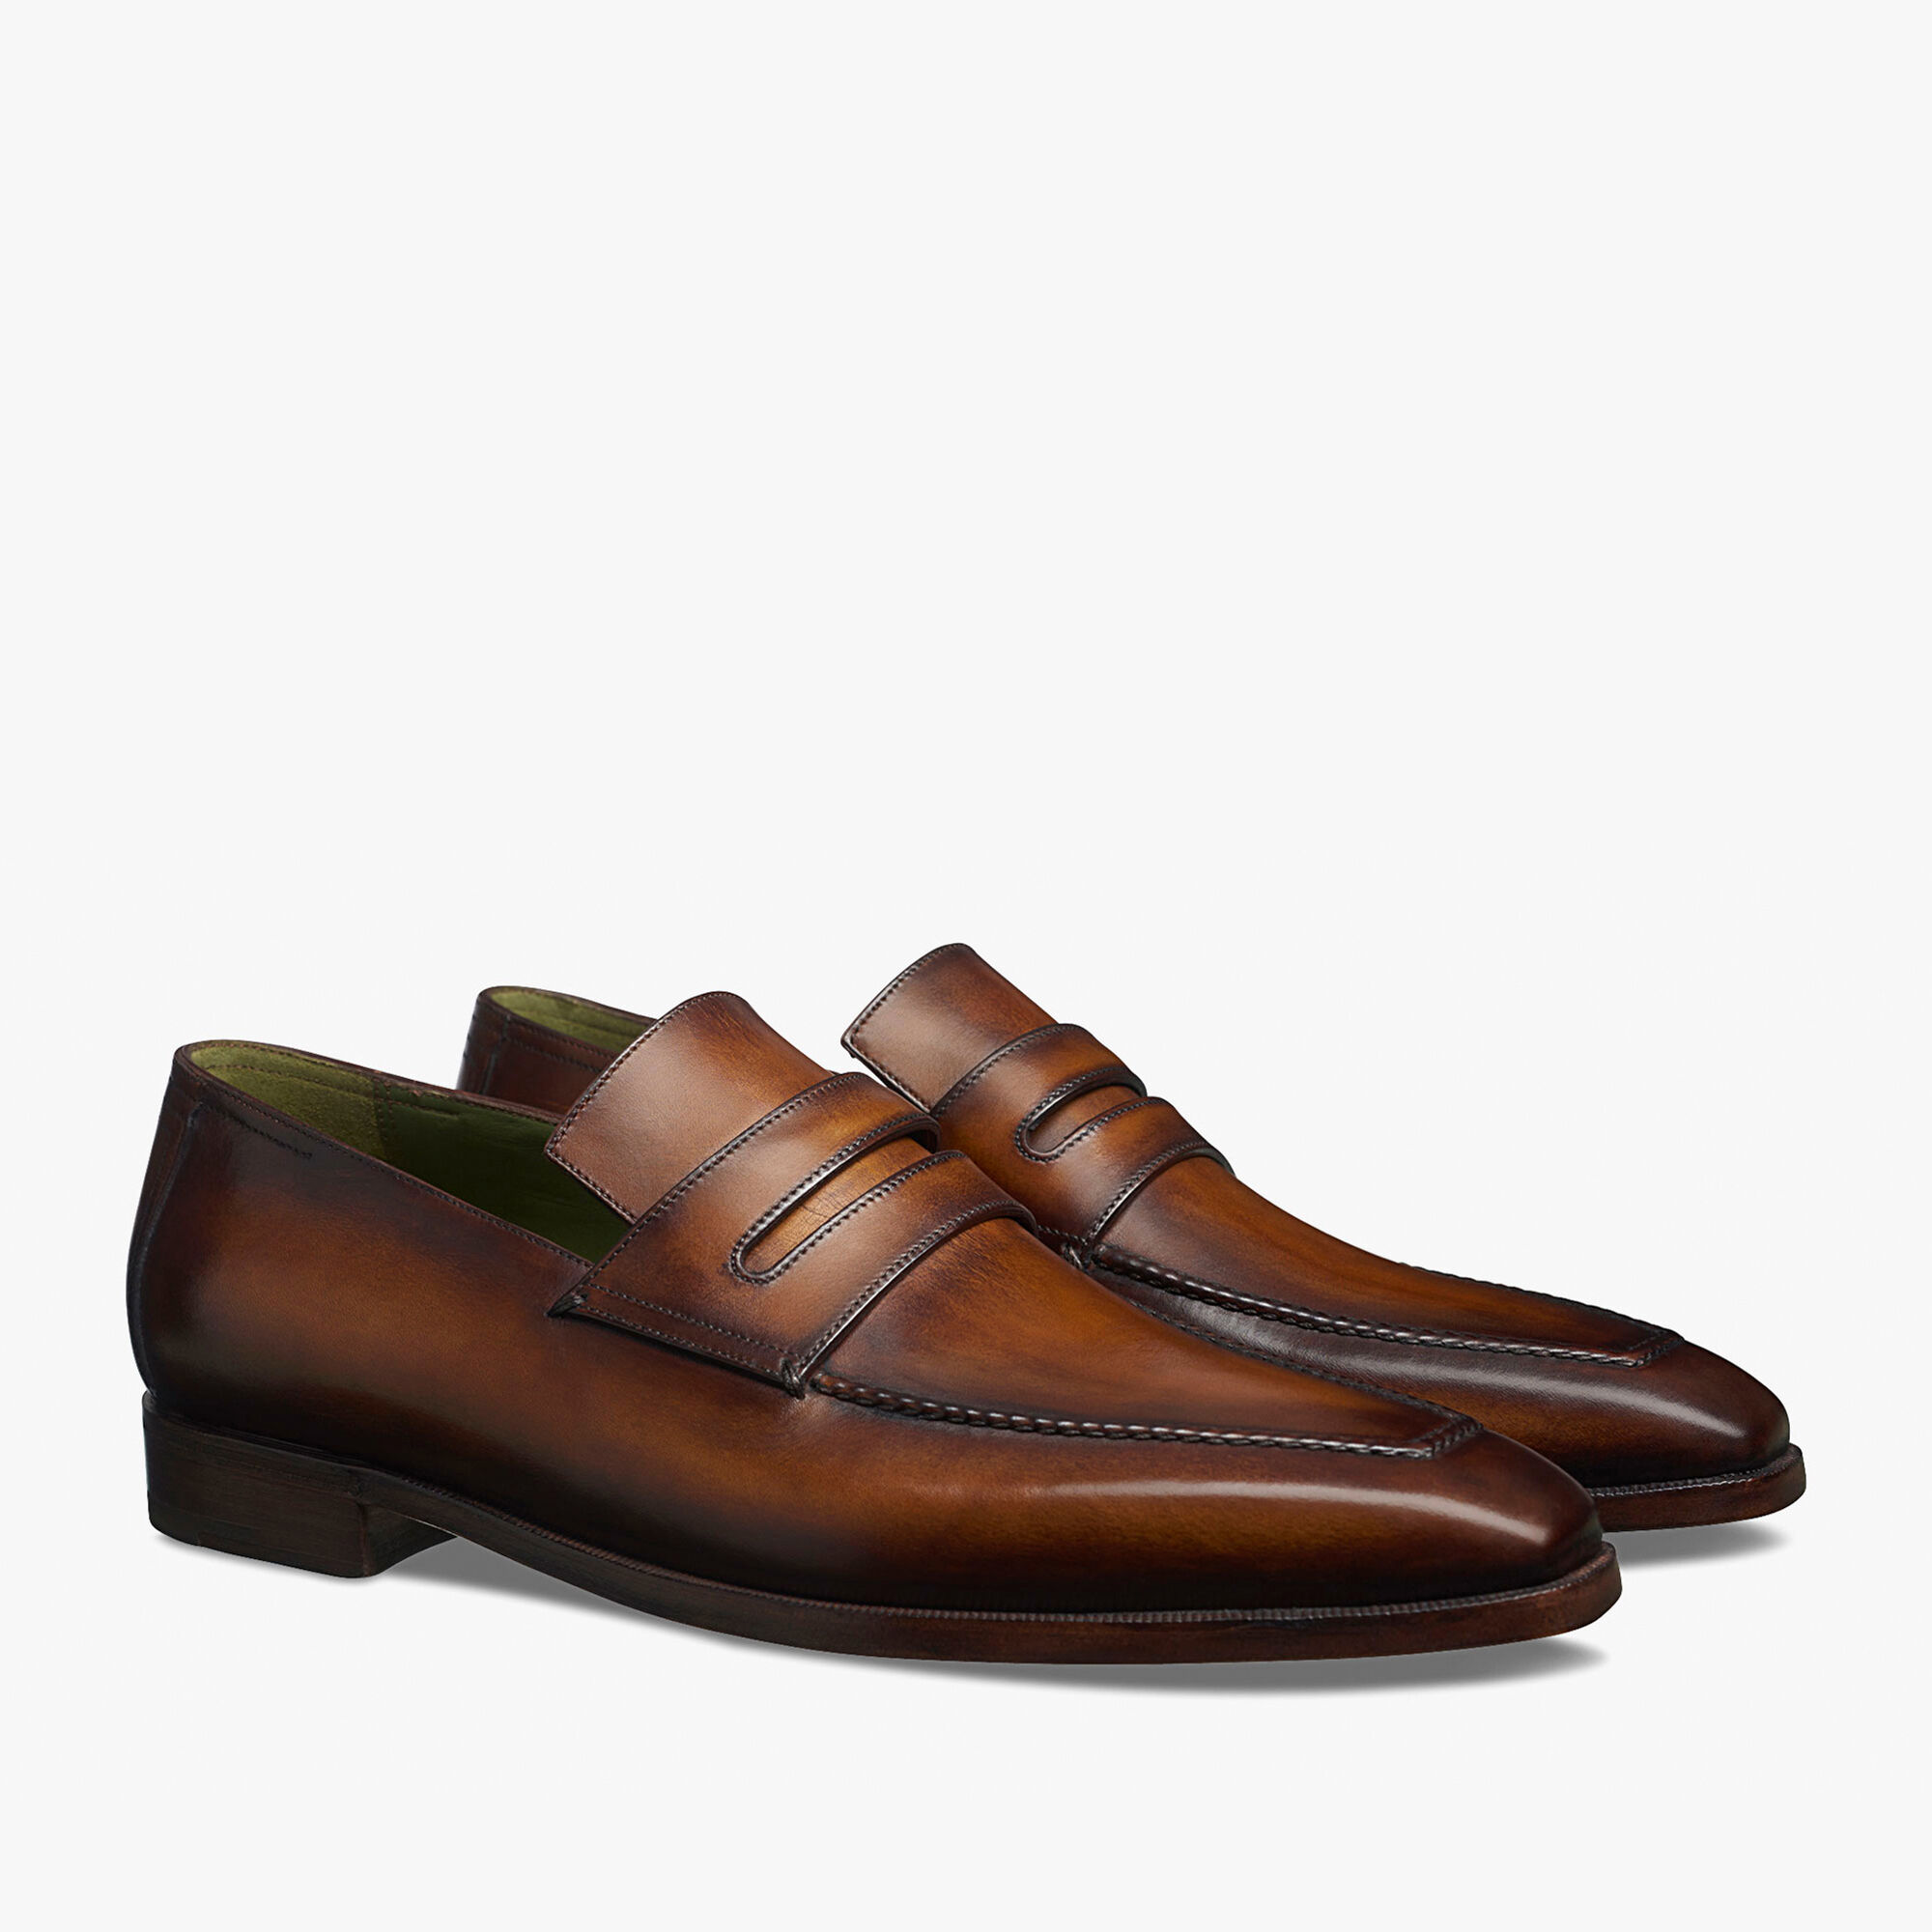 Berluti’s “Andy Démesure Leather Loafer”/Photos from the Berluti website